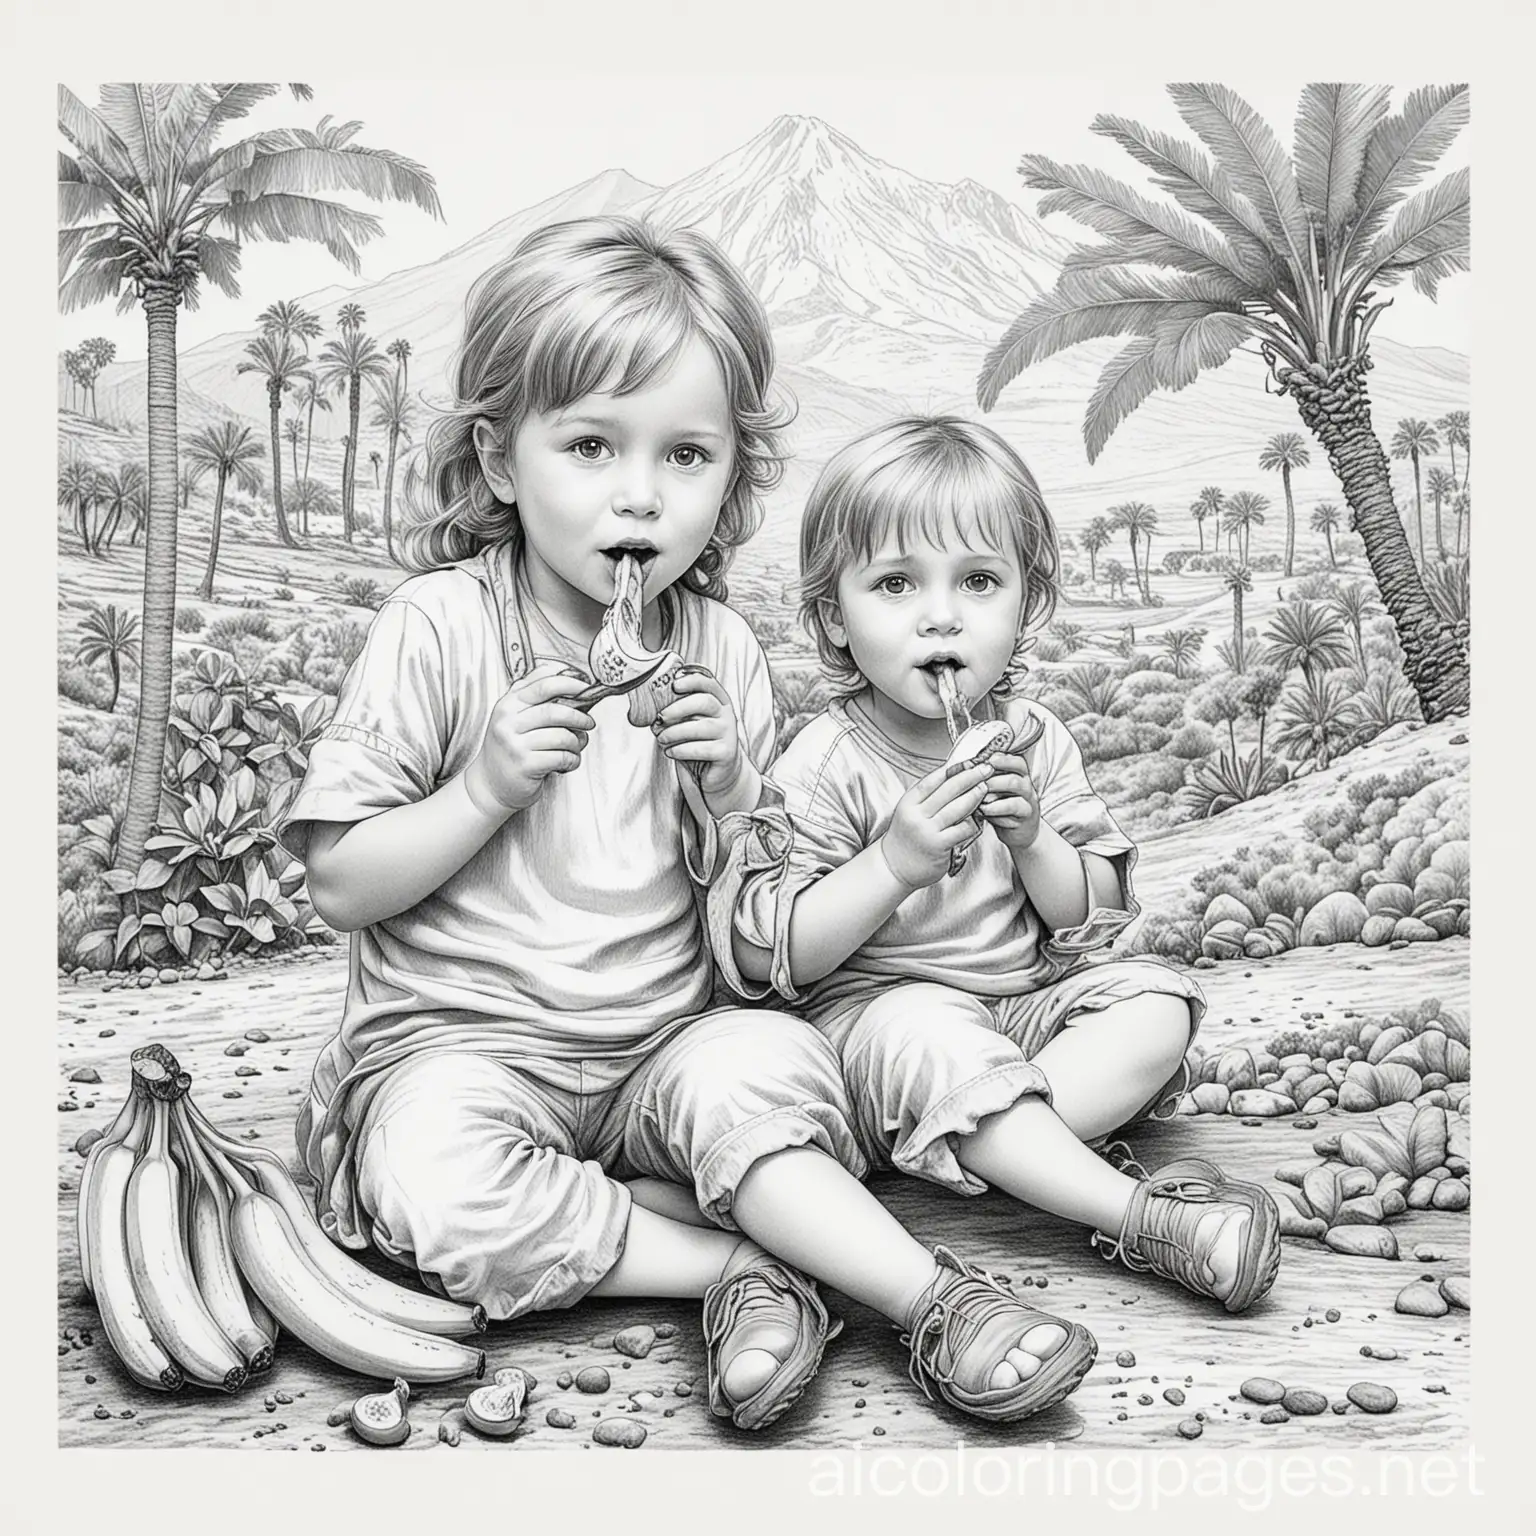 dibujo de niños comiendo platanos en el teide
, Coloring Page, black and white, line art, white background, Simplicity, Ample White Space. The background of the coloring page is plain white to make it easy for young children to color within the lines. The outlines of all the subjects are easy to distinguish, making it simple for kids to color without too much difficulty